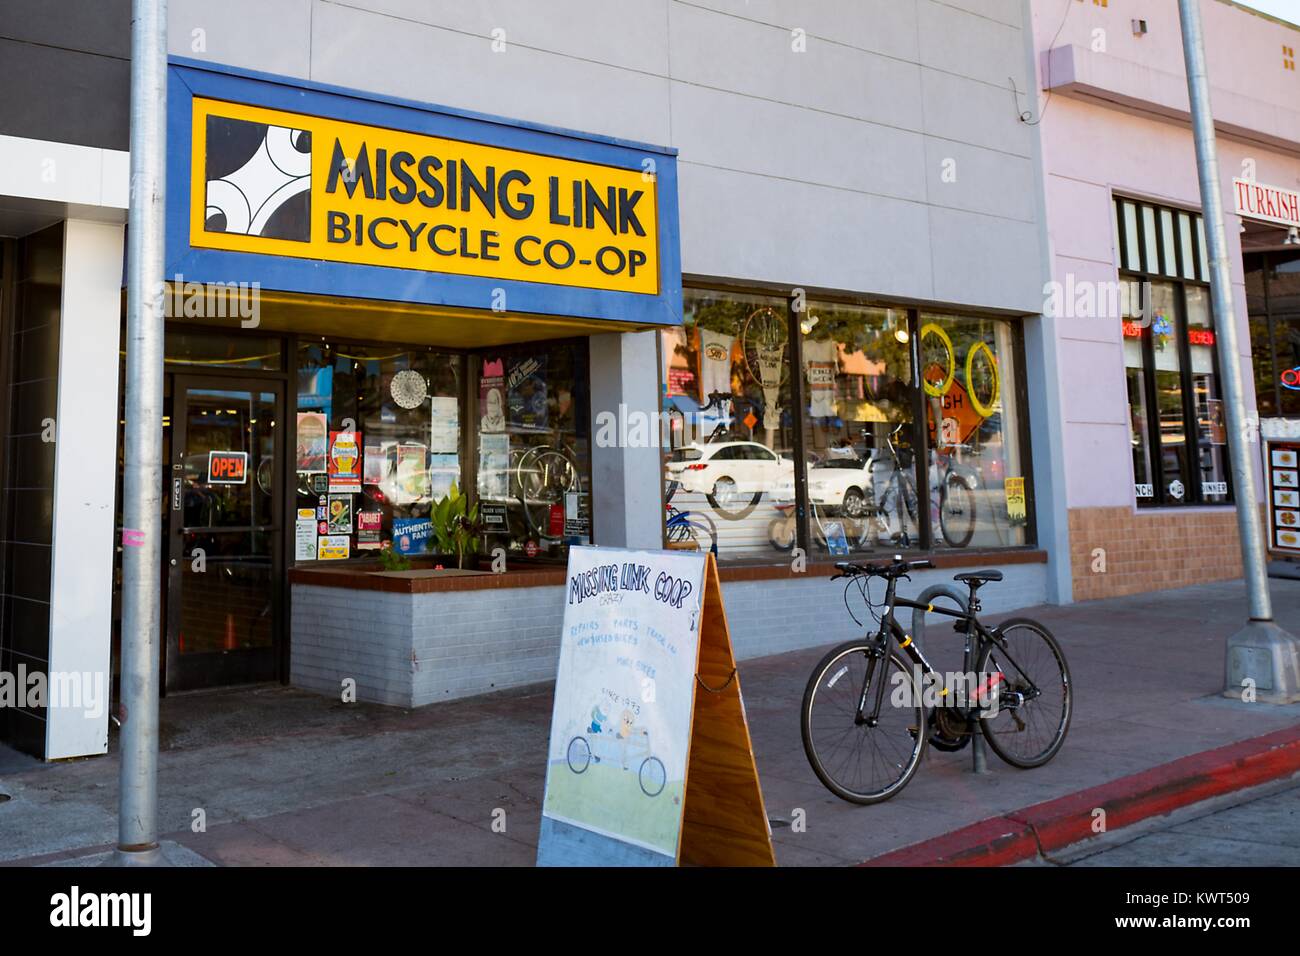 Facade of the Missing Link bicycle co-op (cooperative organization), a bicycle repair shop originally founded in 1971, in downtown Berkeley, California, October 6, 2017. () Stock Photo